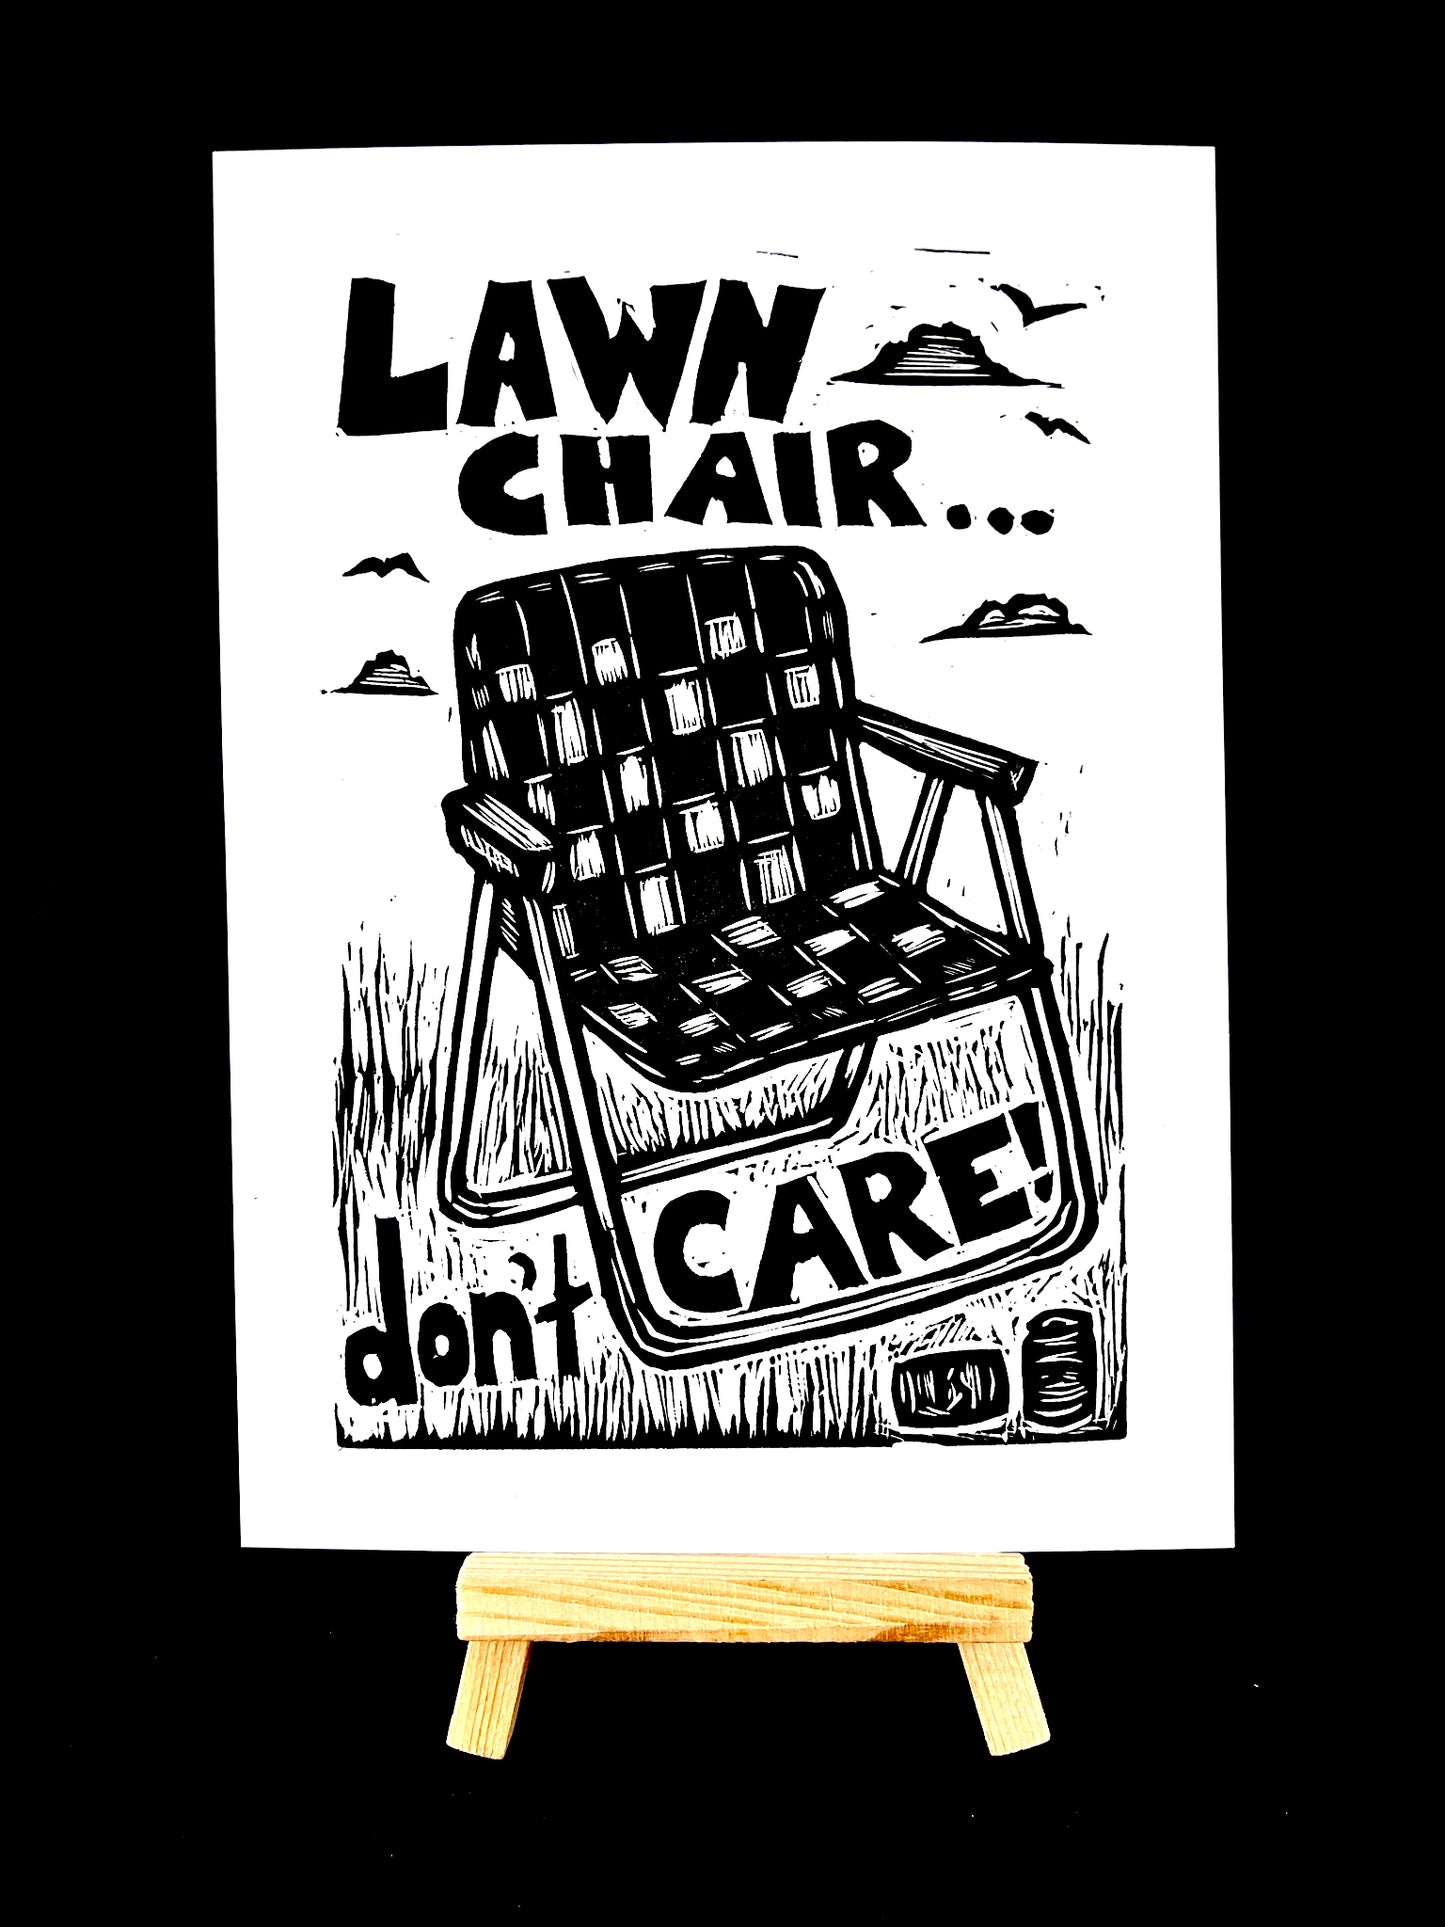 Lawn Chair... Don't Care!